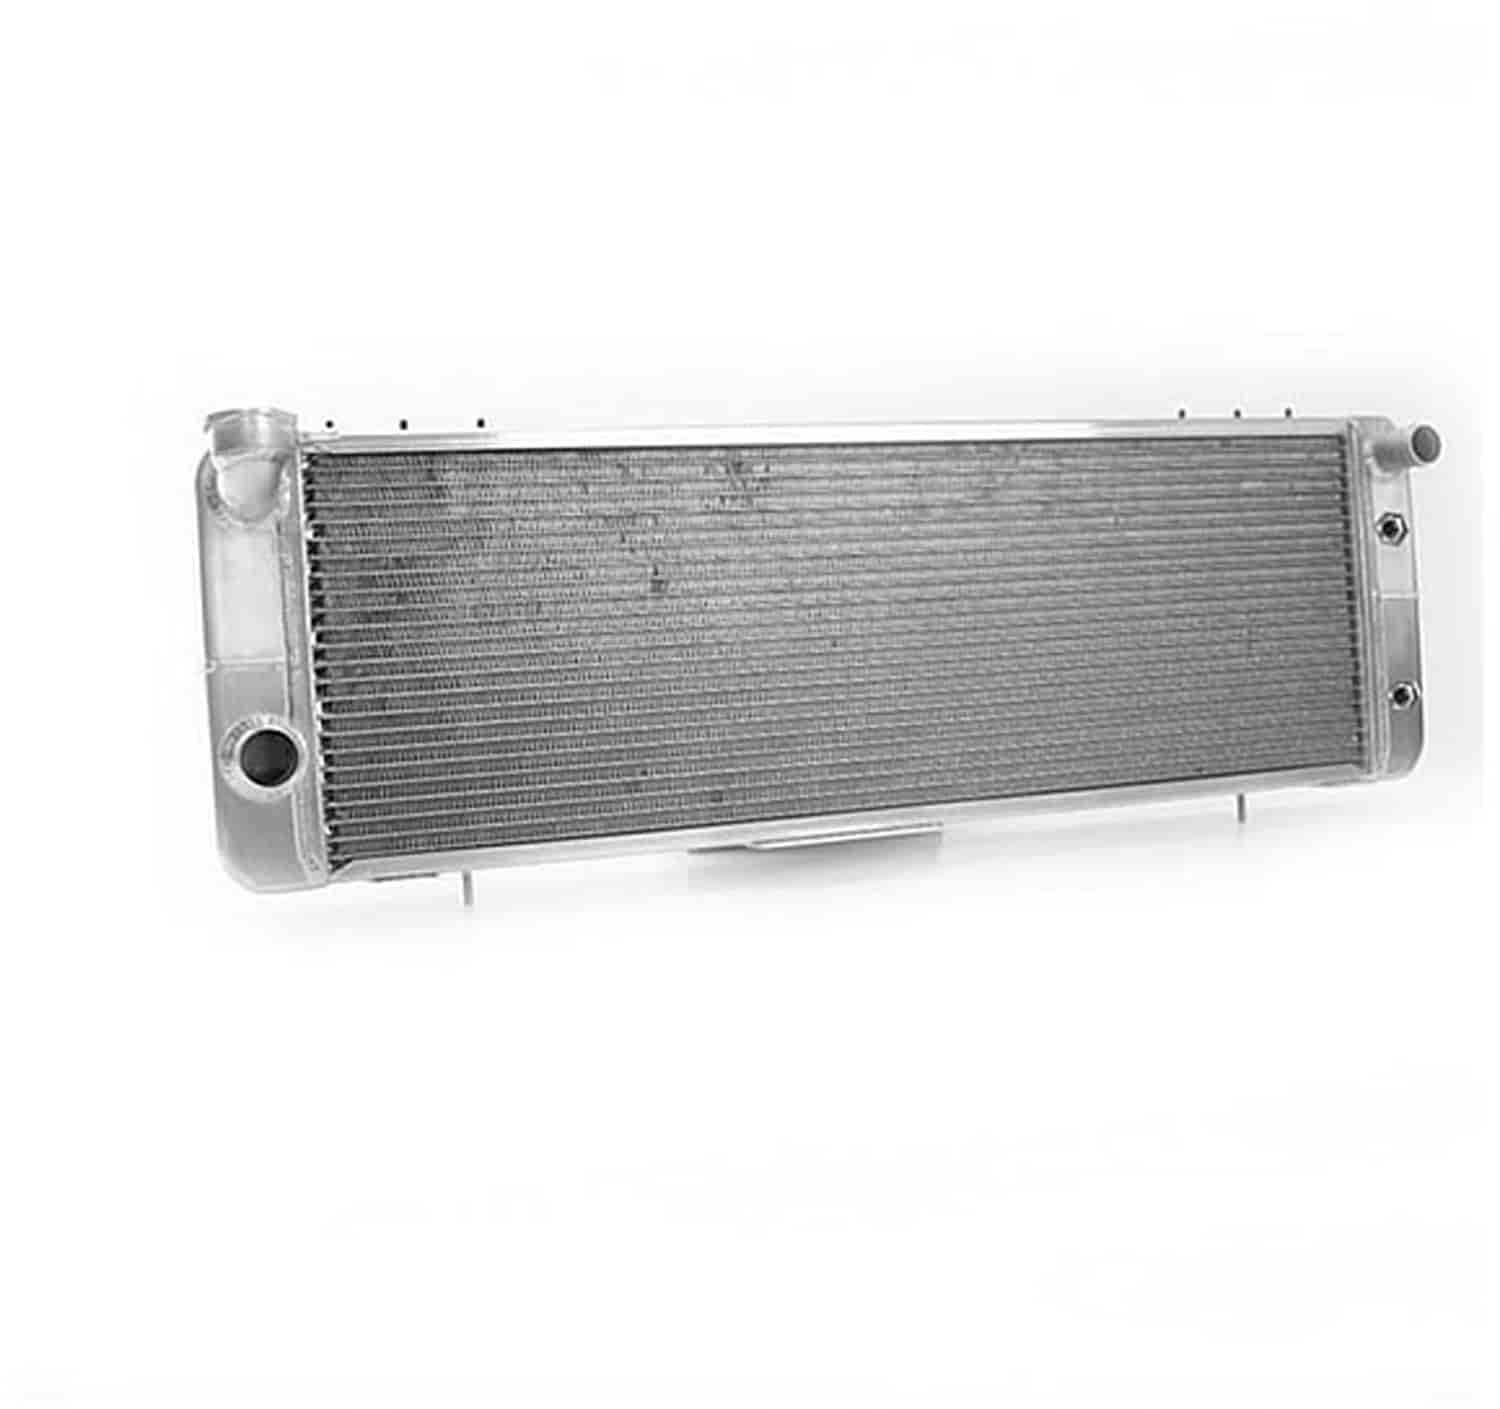 ExactFit Radiator for 1988-2001 Jeep Cherokee with 4.0 L6